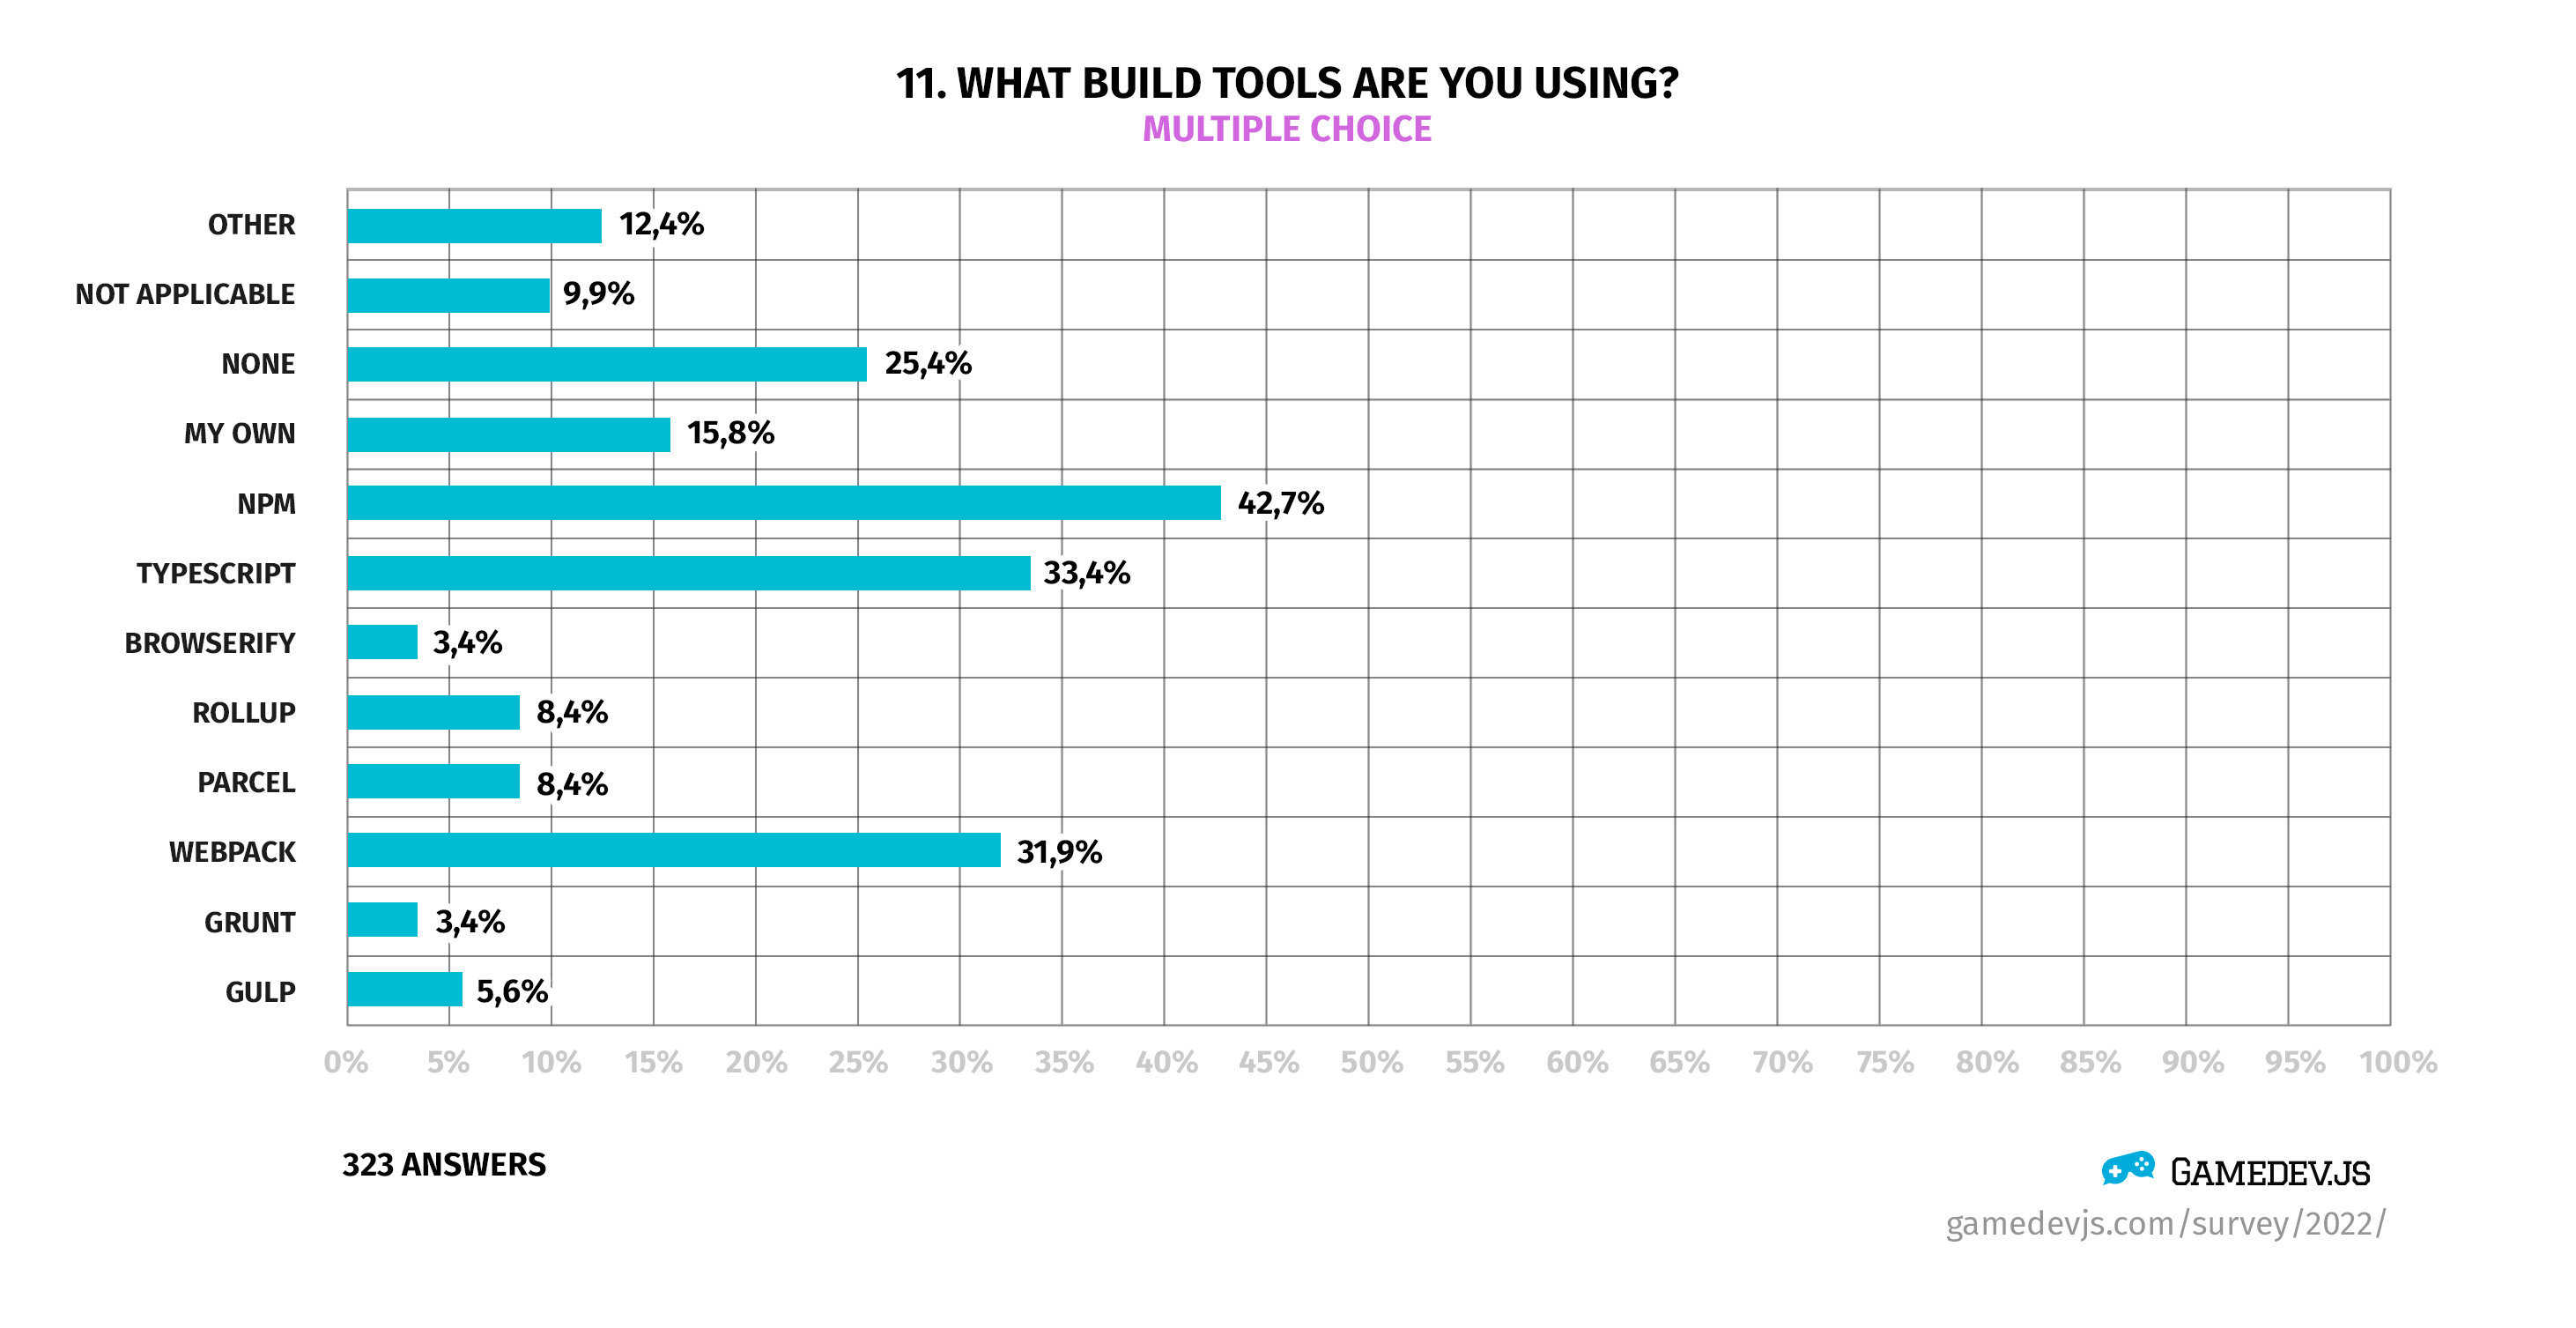 Gamedev.js Survey 2022 - Question #11: What build tools are you using?